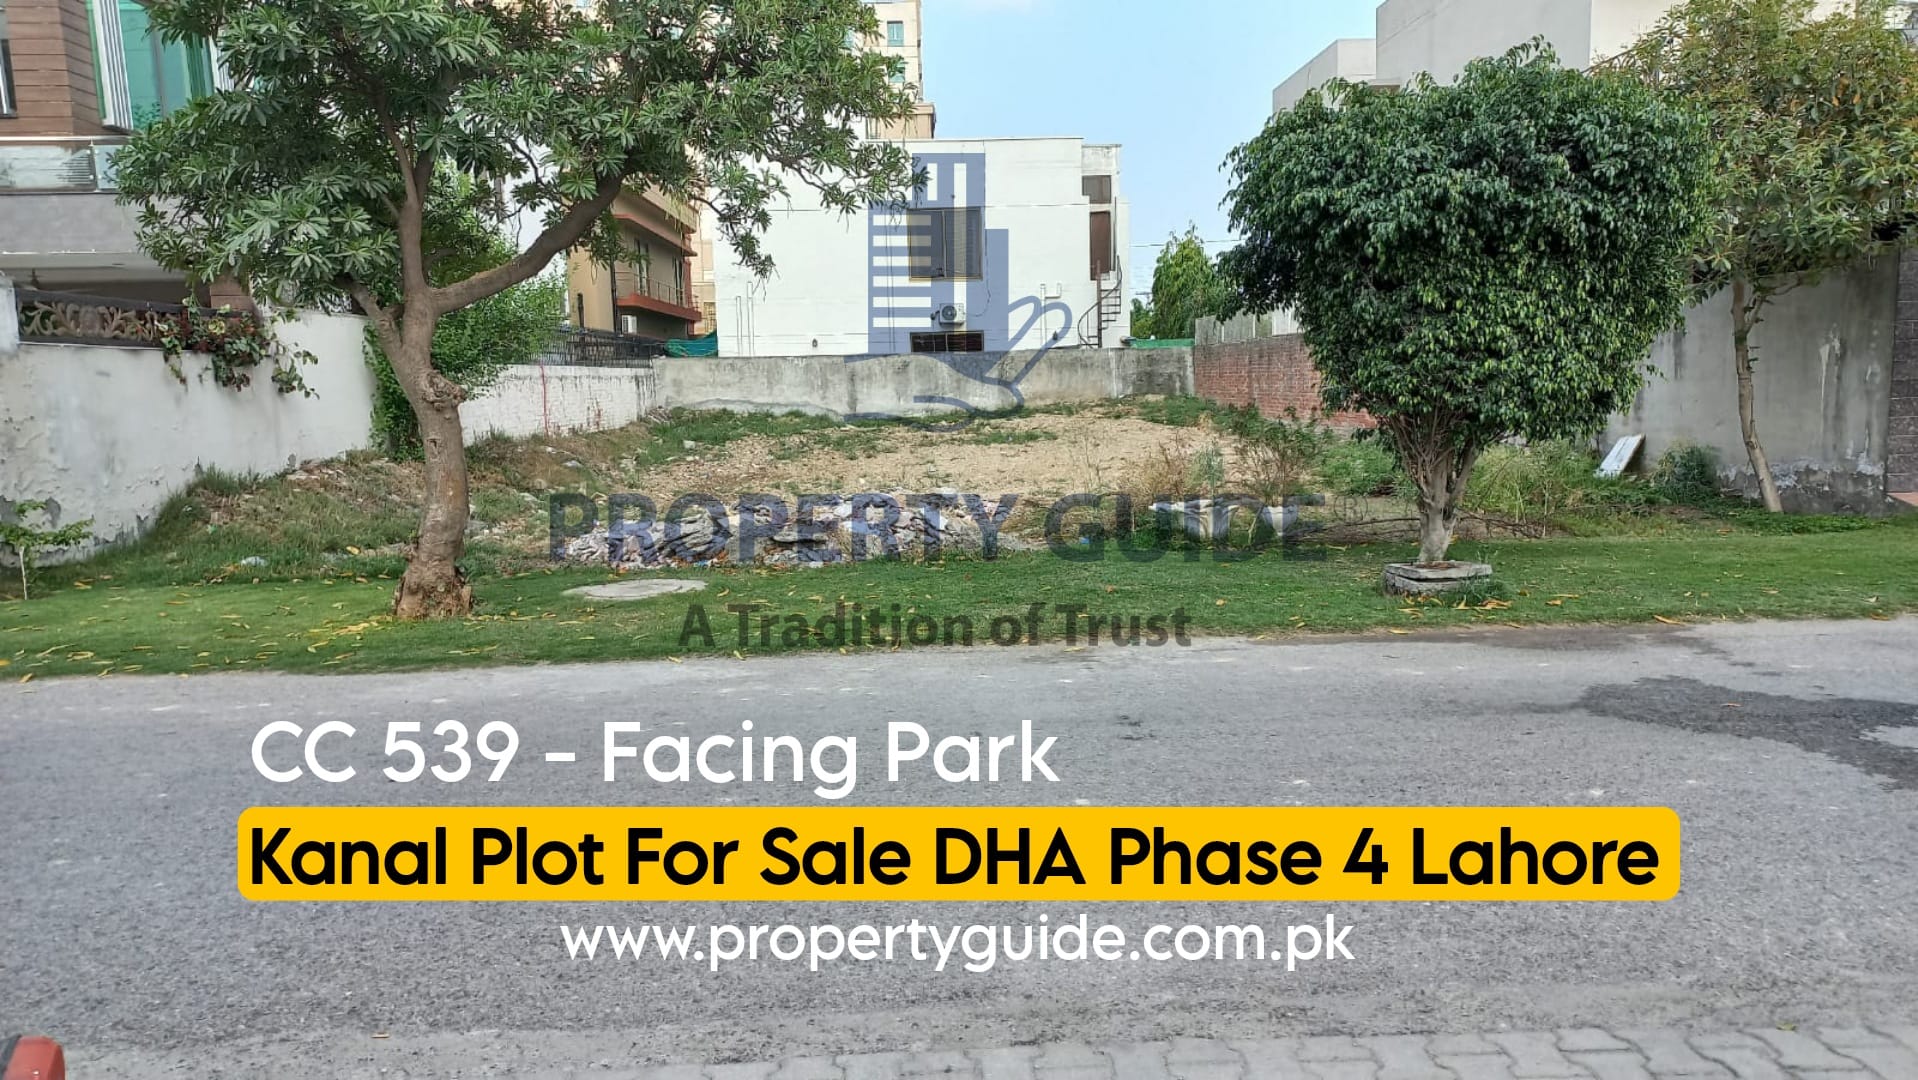 DHA Phase 4 Lahore Plots For Sale